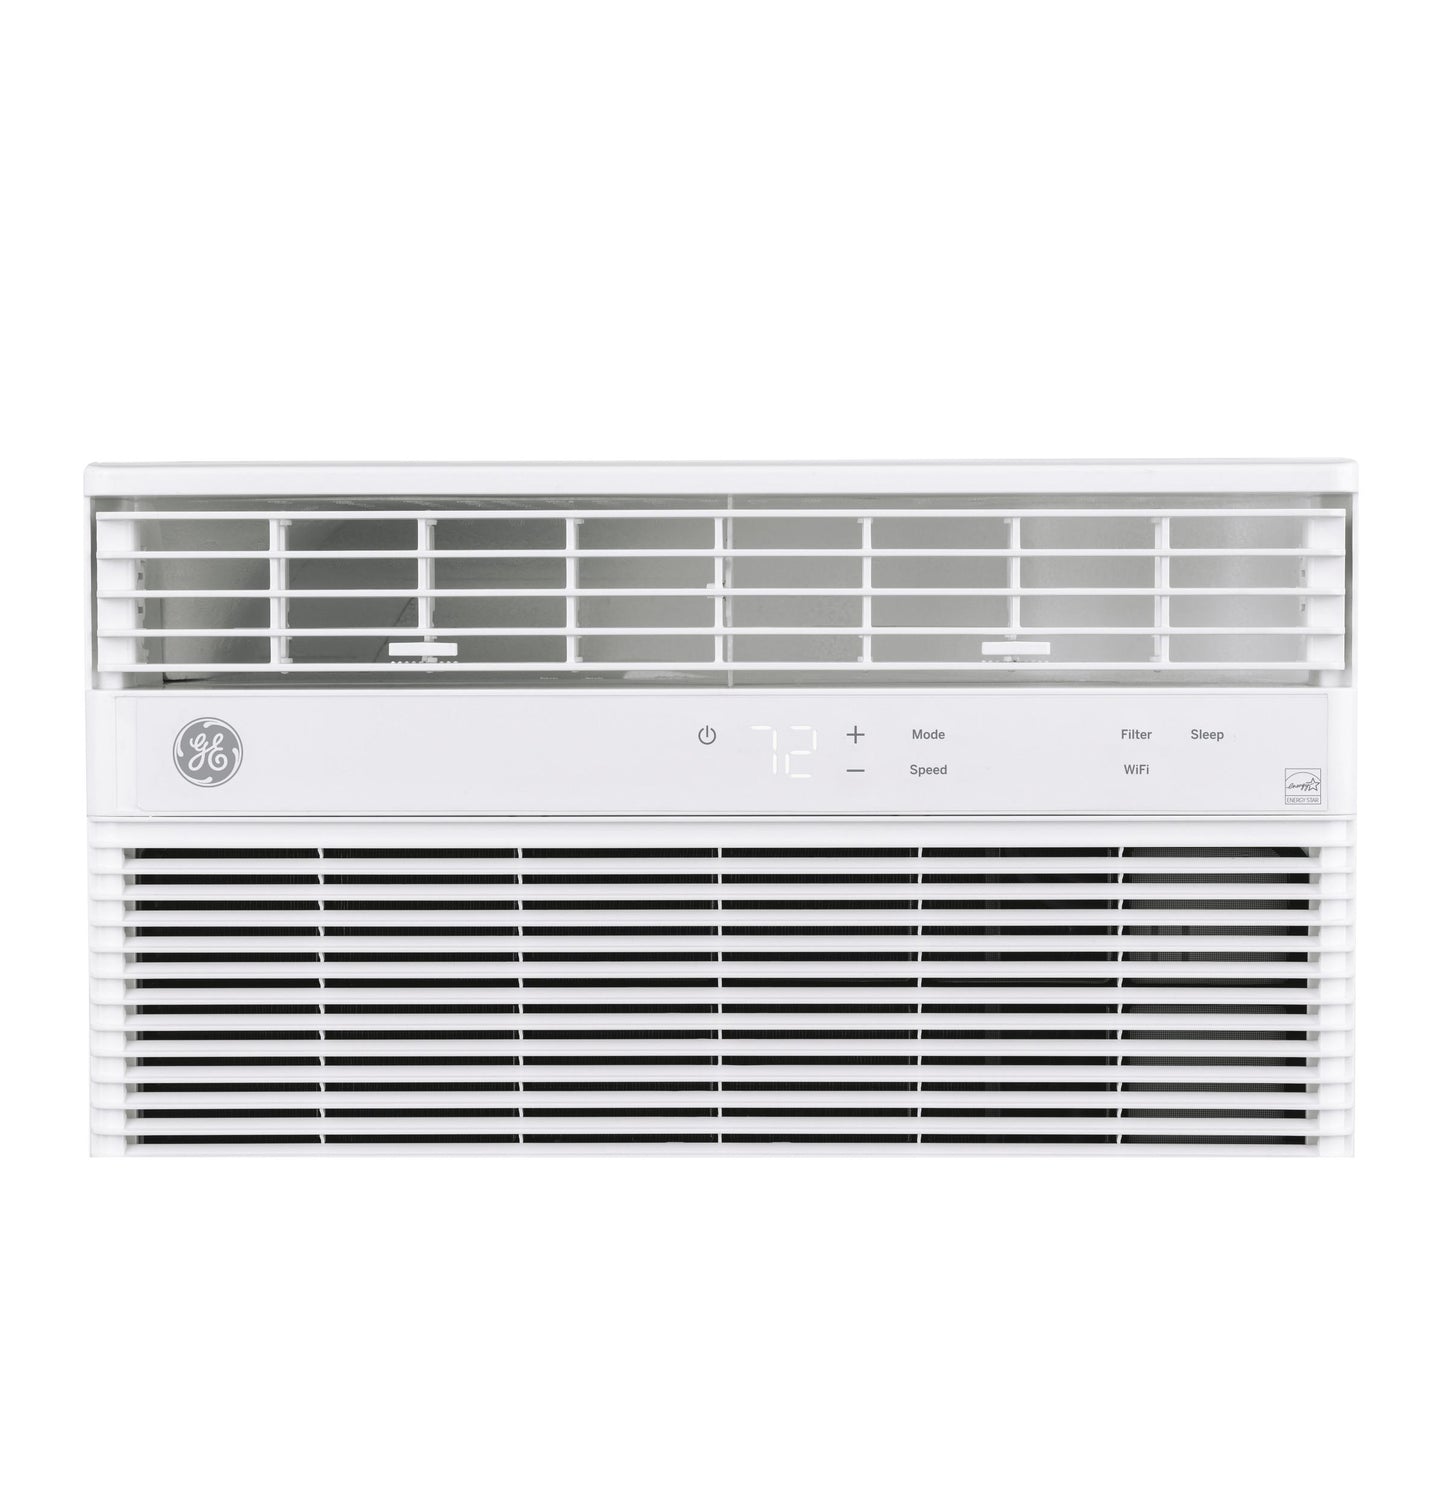 Ge Appliances AHEK14AC Ge® Energy Star® 14,000 Btu Smart Electronic Window Air Conditioner For Large Rooms Up To 700 Sq. Ft.